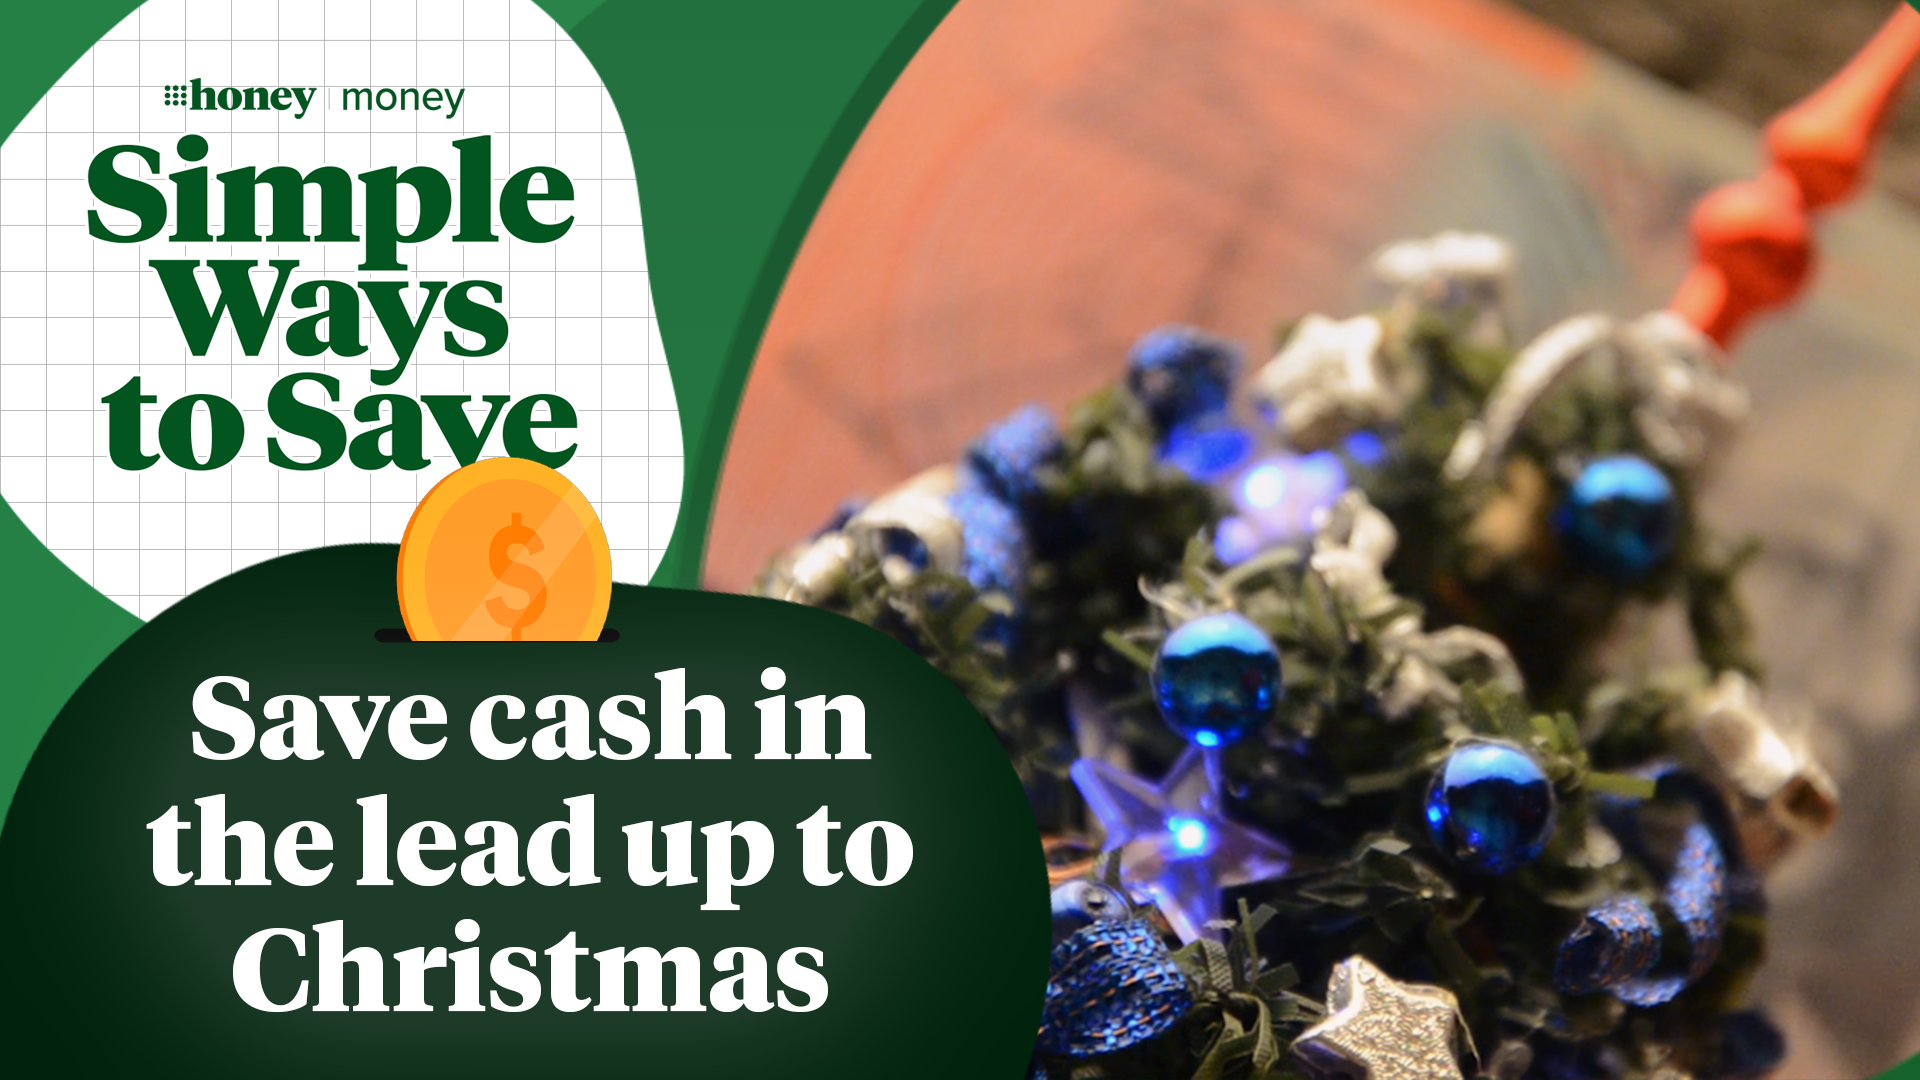 Simple Ways to Save: How to make and save extra cash in the lead up to Christmas